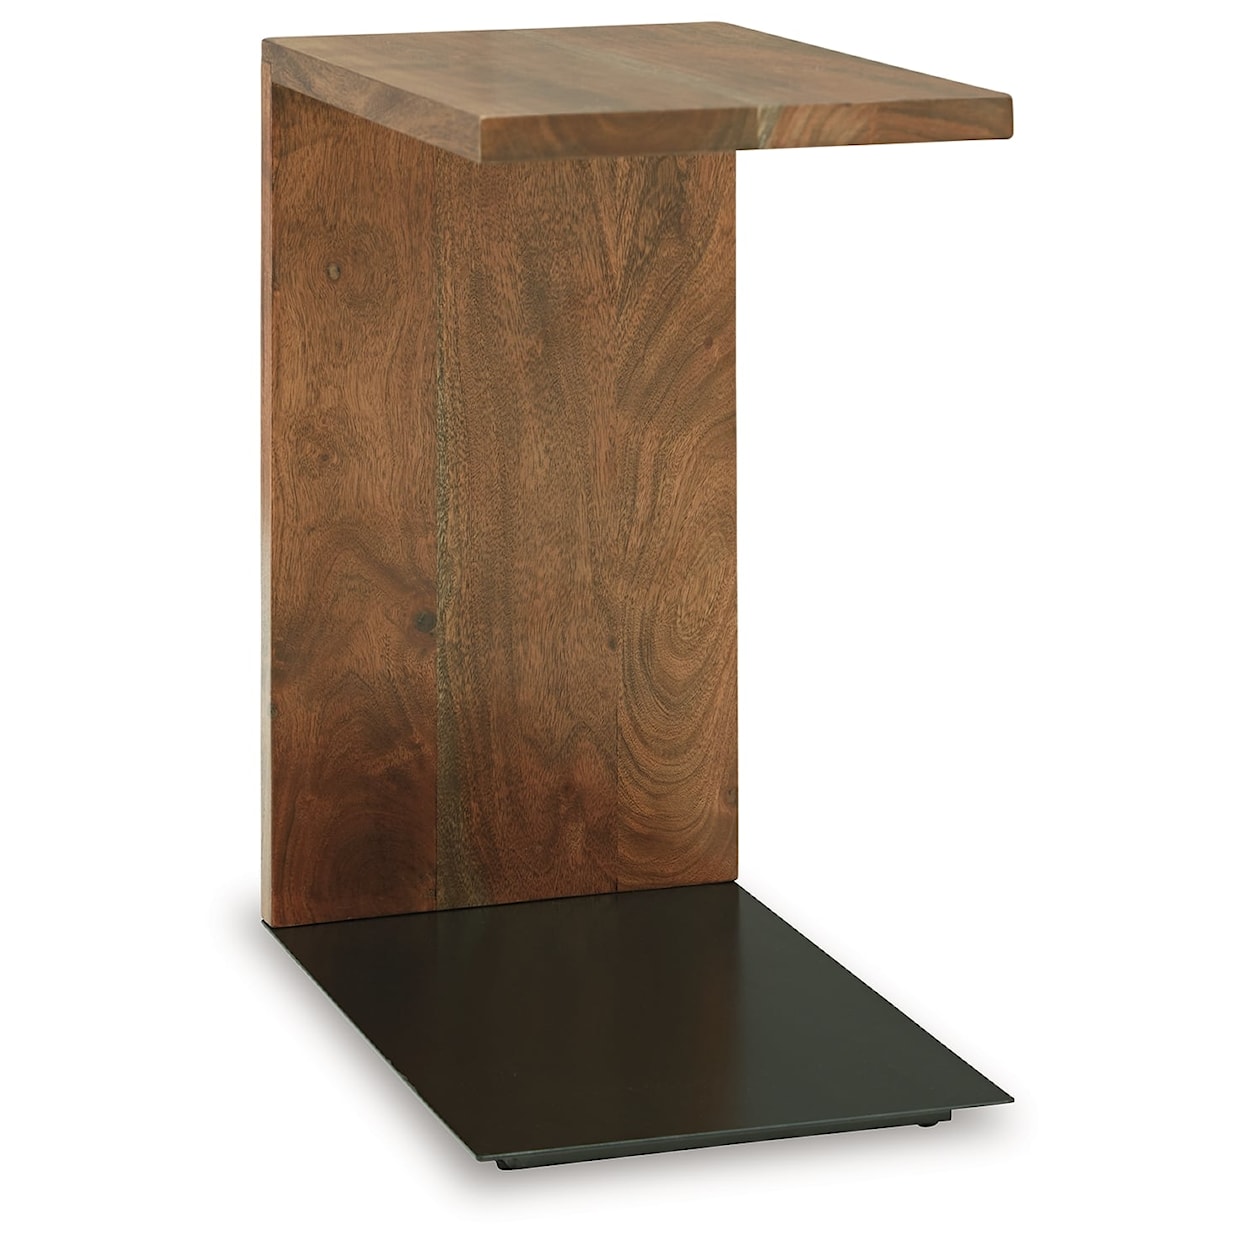 Signature Wimshaw Accent Table